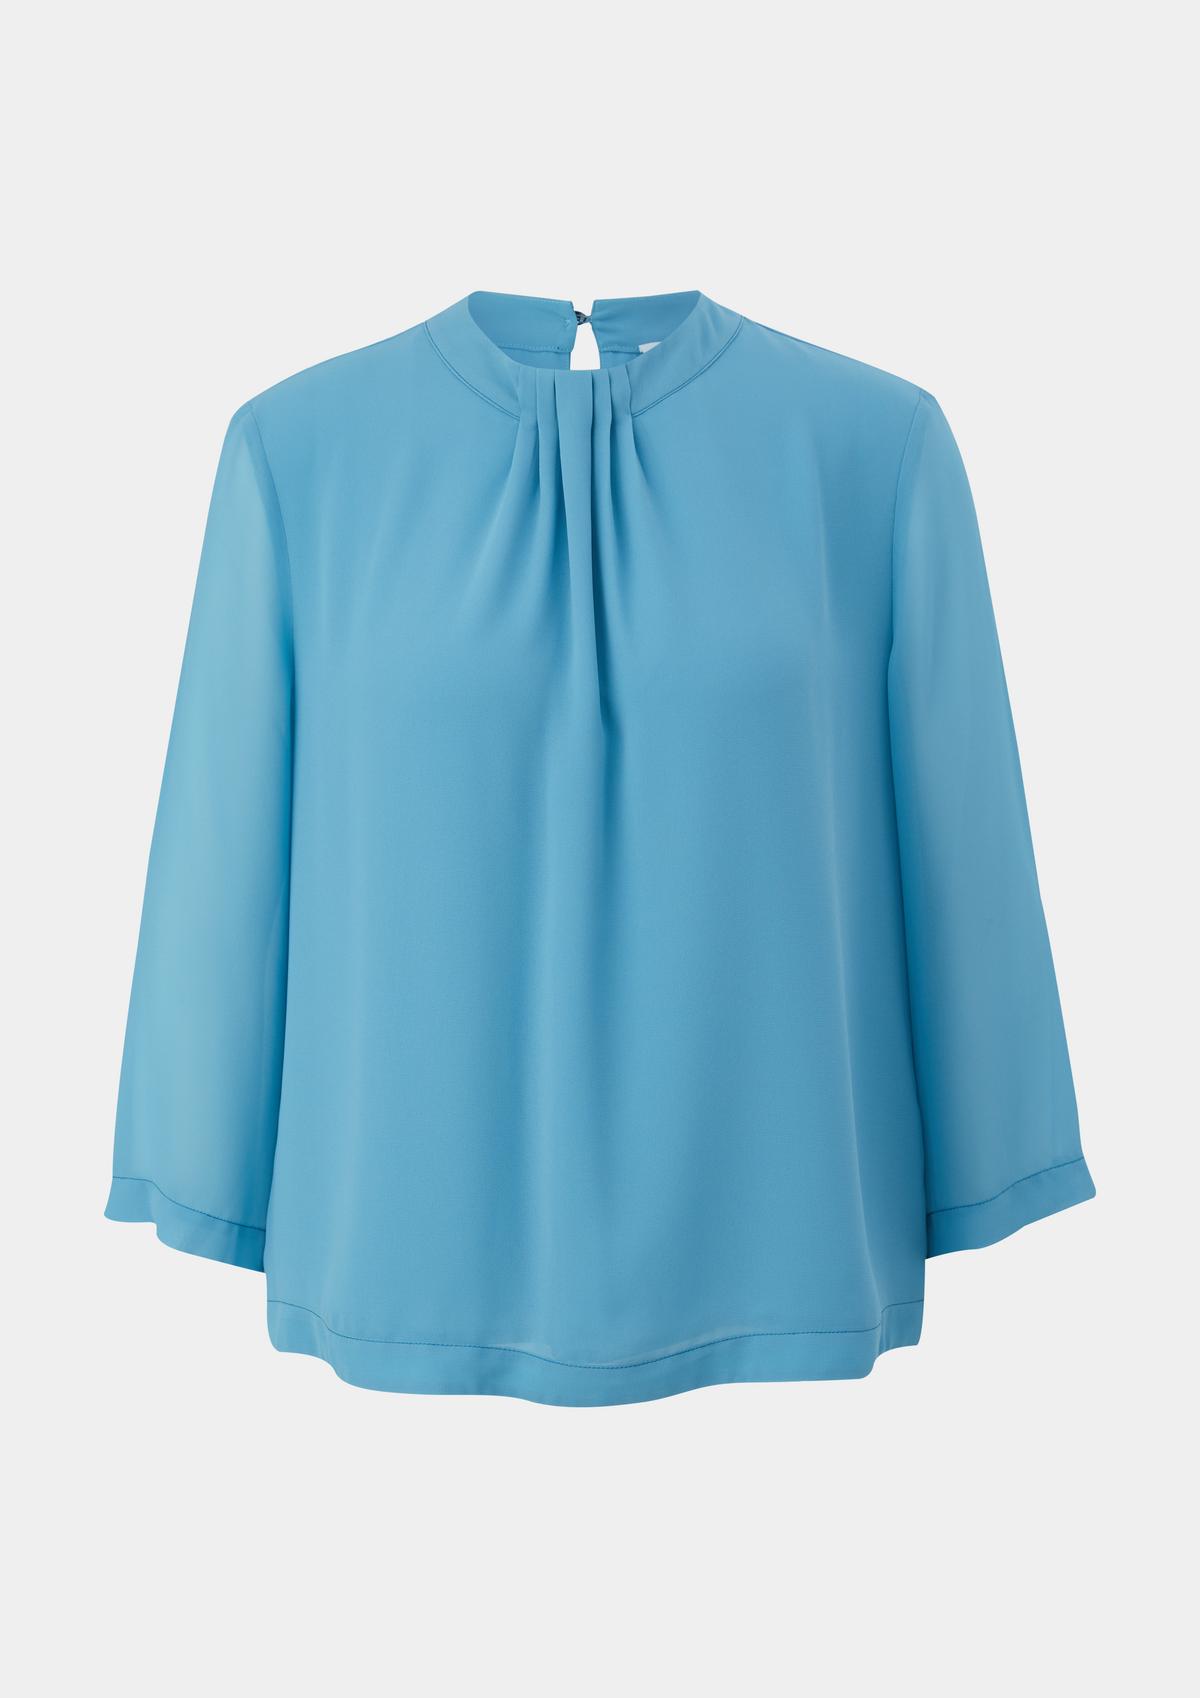 s.Oliver Blouse top with gathering